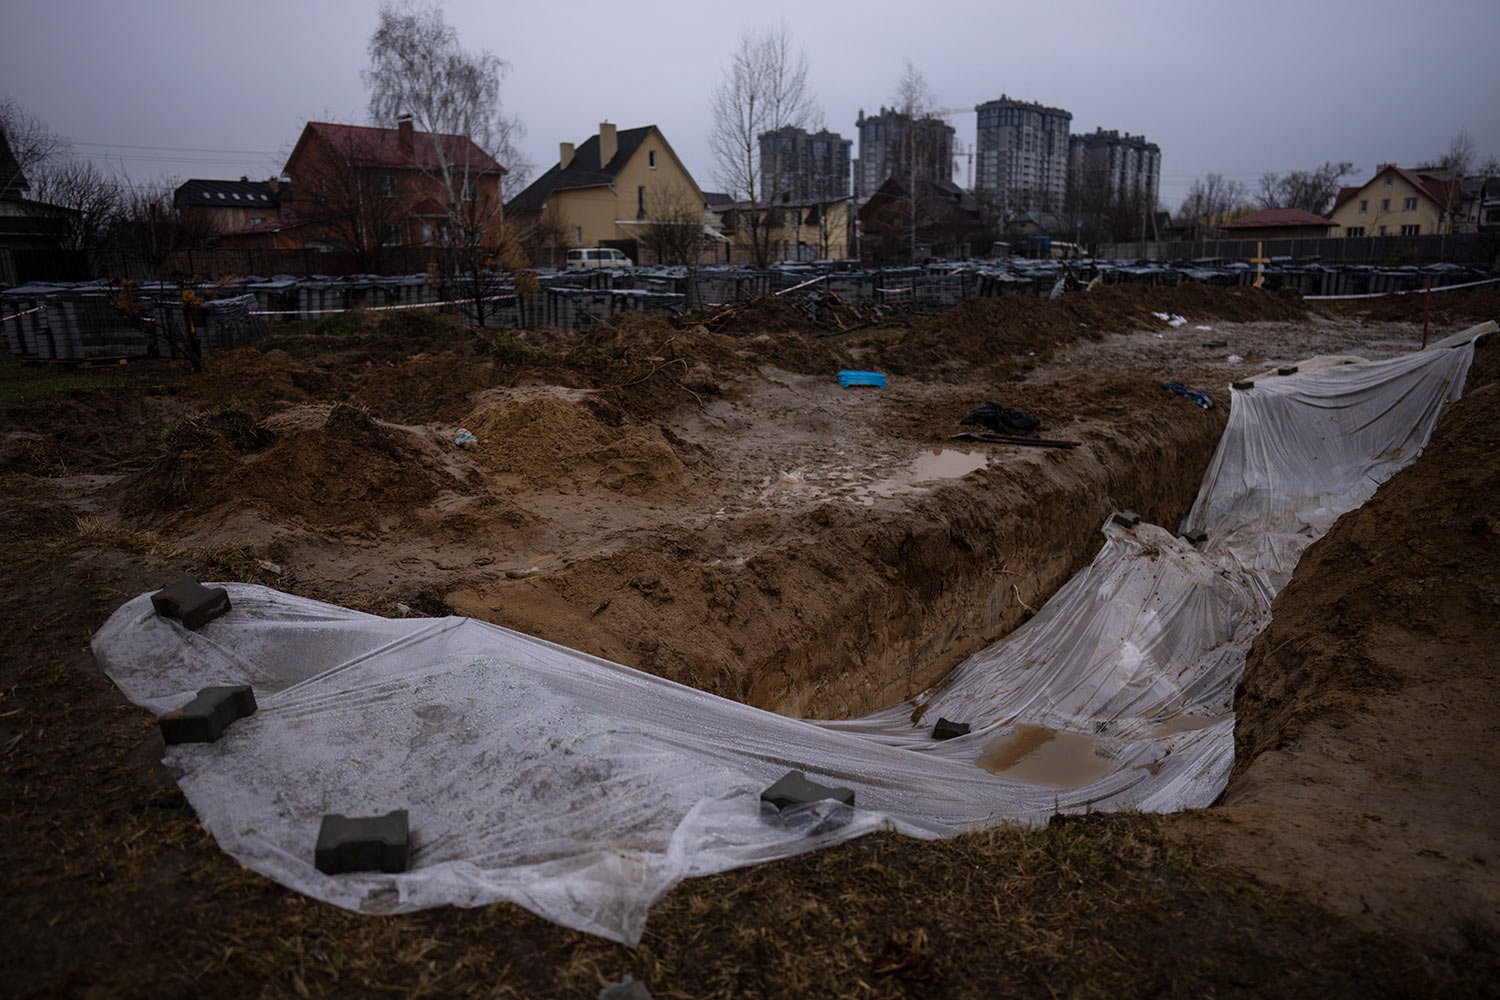  A plastic sheet covers a mass grave with civilians killed during the war against Russia in Bucha, in the outskirts of Kyiv, Ukraine, Sunday, April 10, 2022. (AP Photo/Rodrigo Abd) 